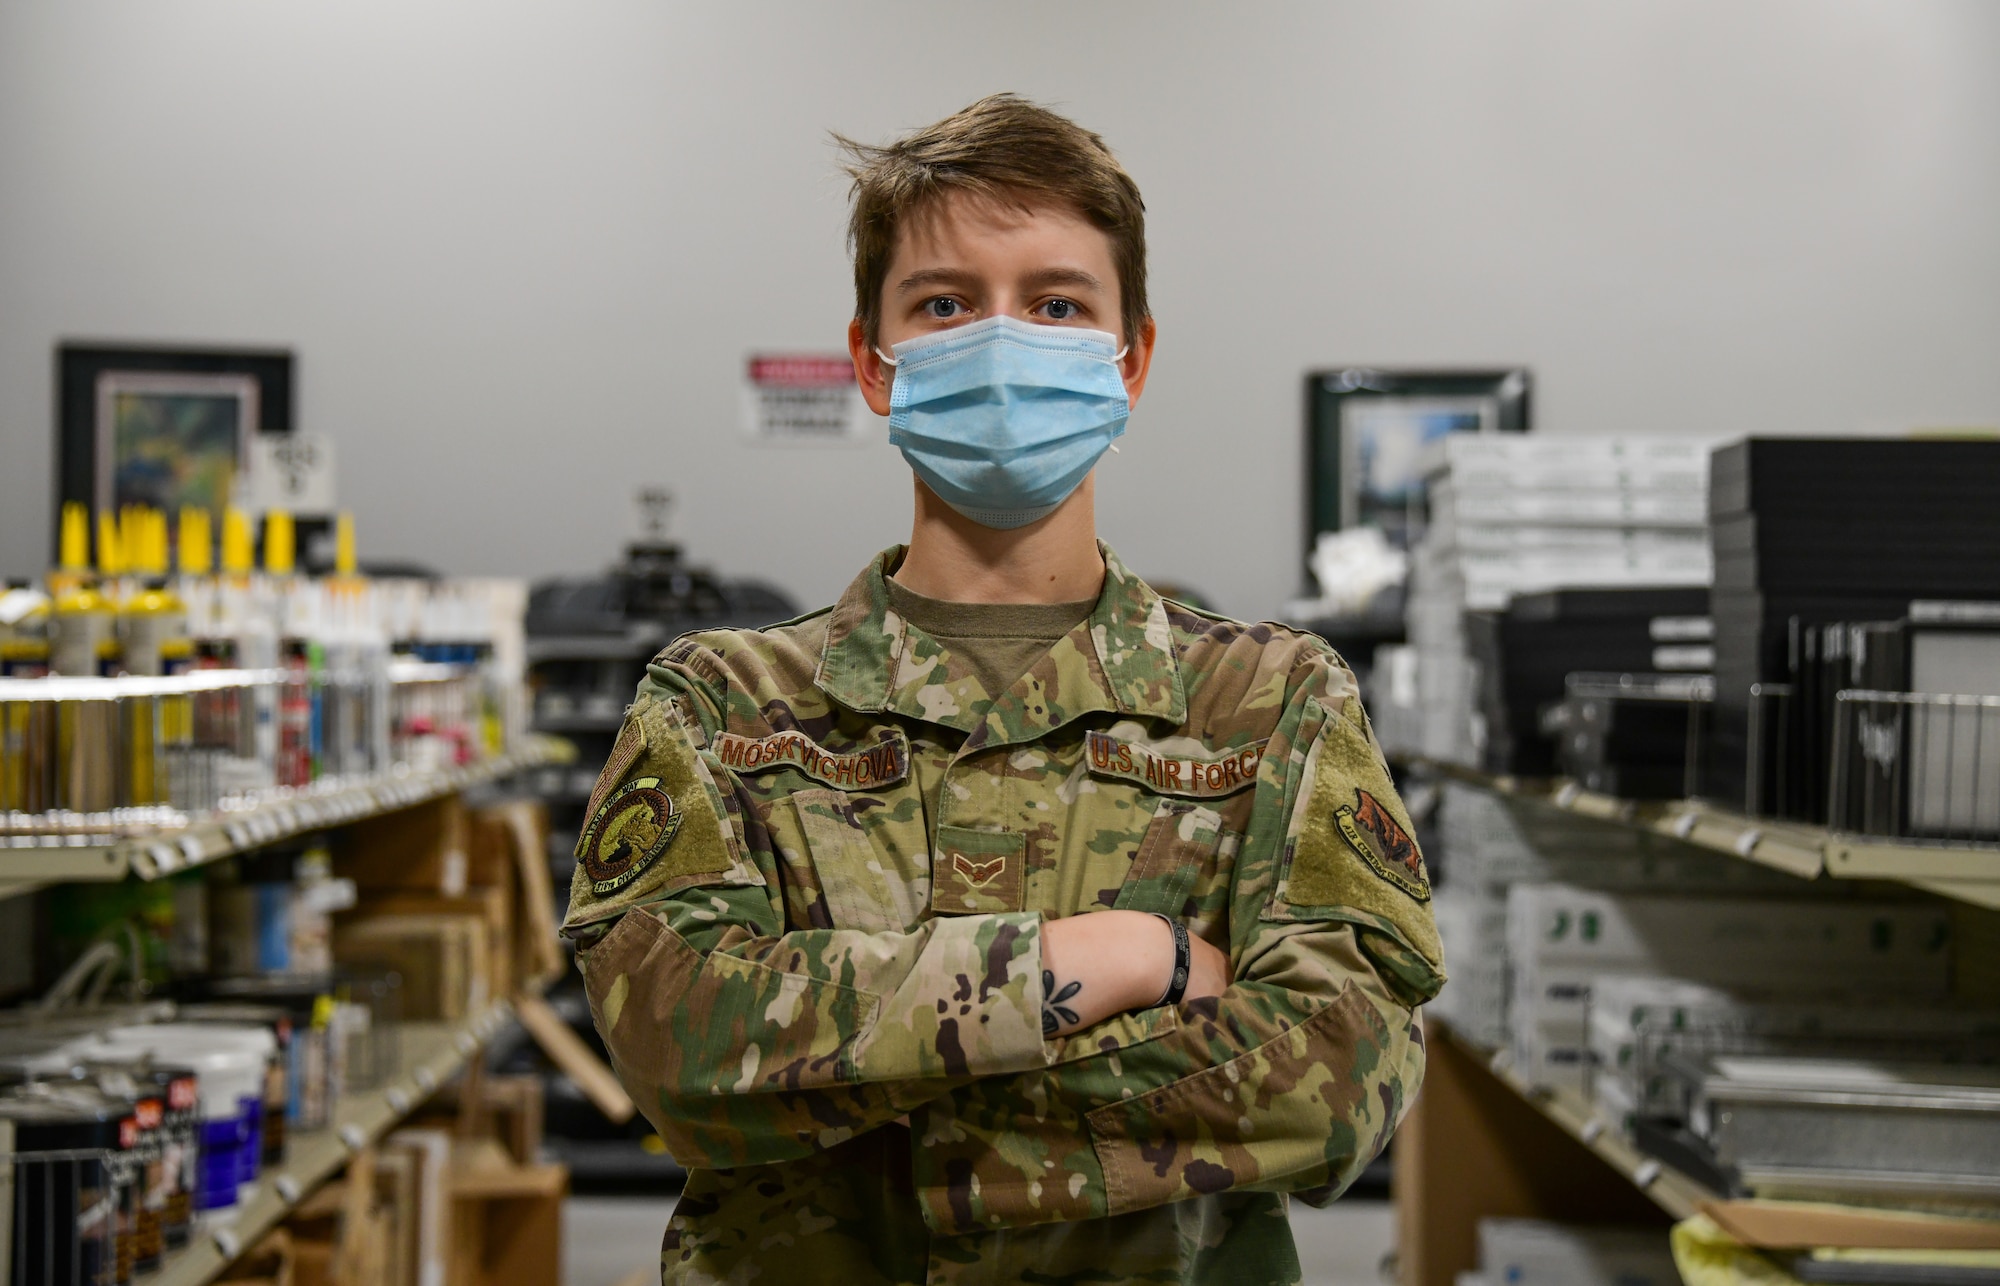 A1C Moskvichova poses for a photo in front of shelves of supplies in the material control warehouse